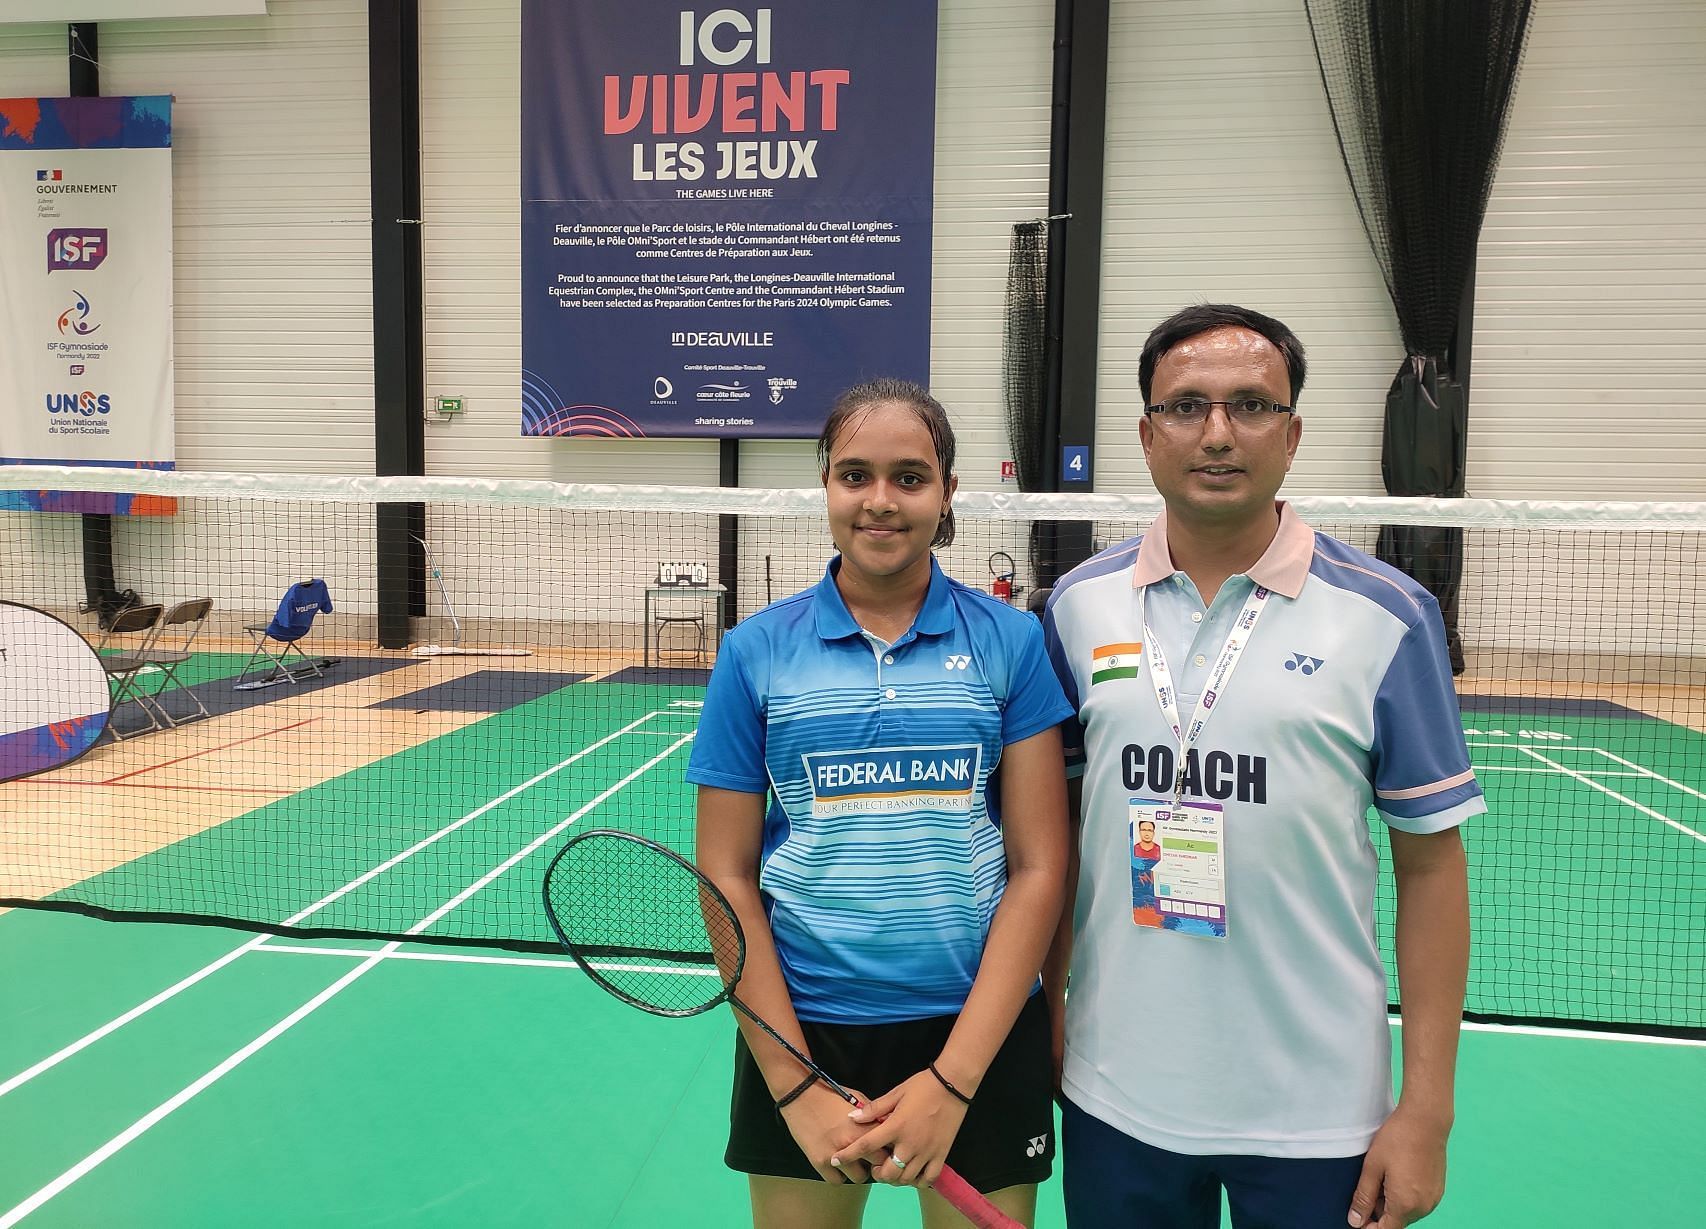 Nikkita Joseph (L) with her coach Chetak Khedikar during the 19th International School Federation Games in Normandy, France. (Pic credit: ISF)